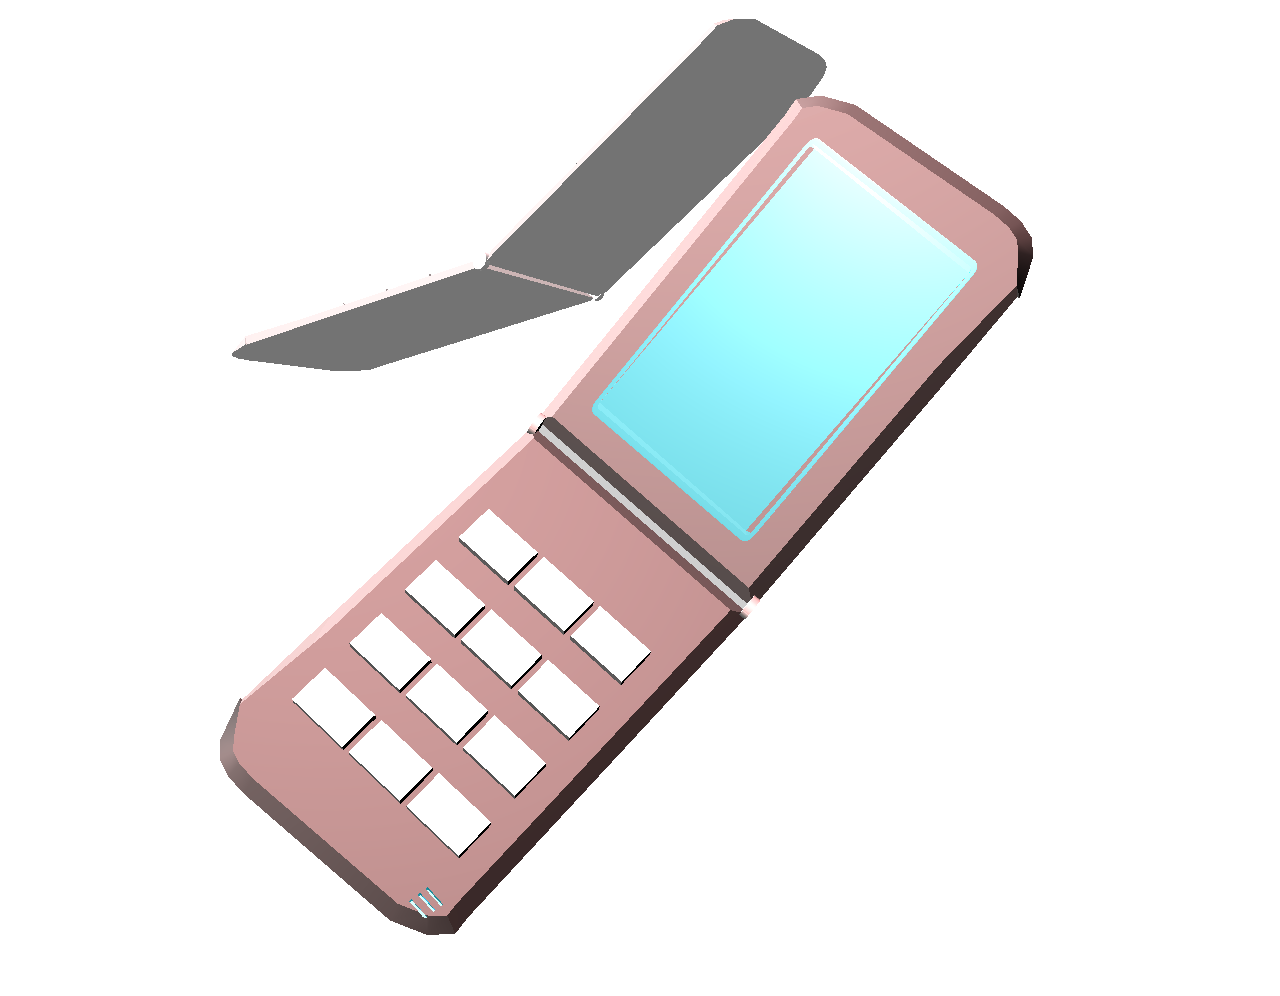 File:CellPhone.png